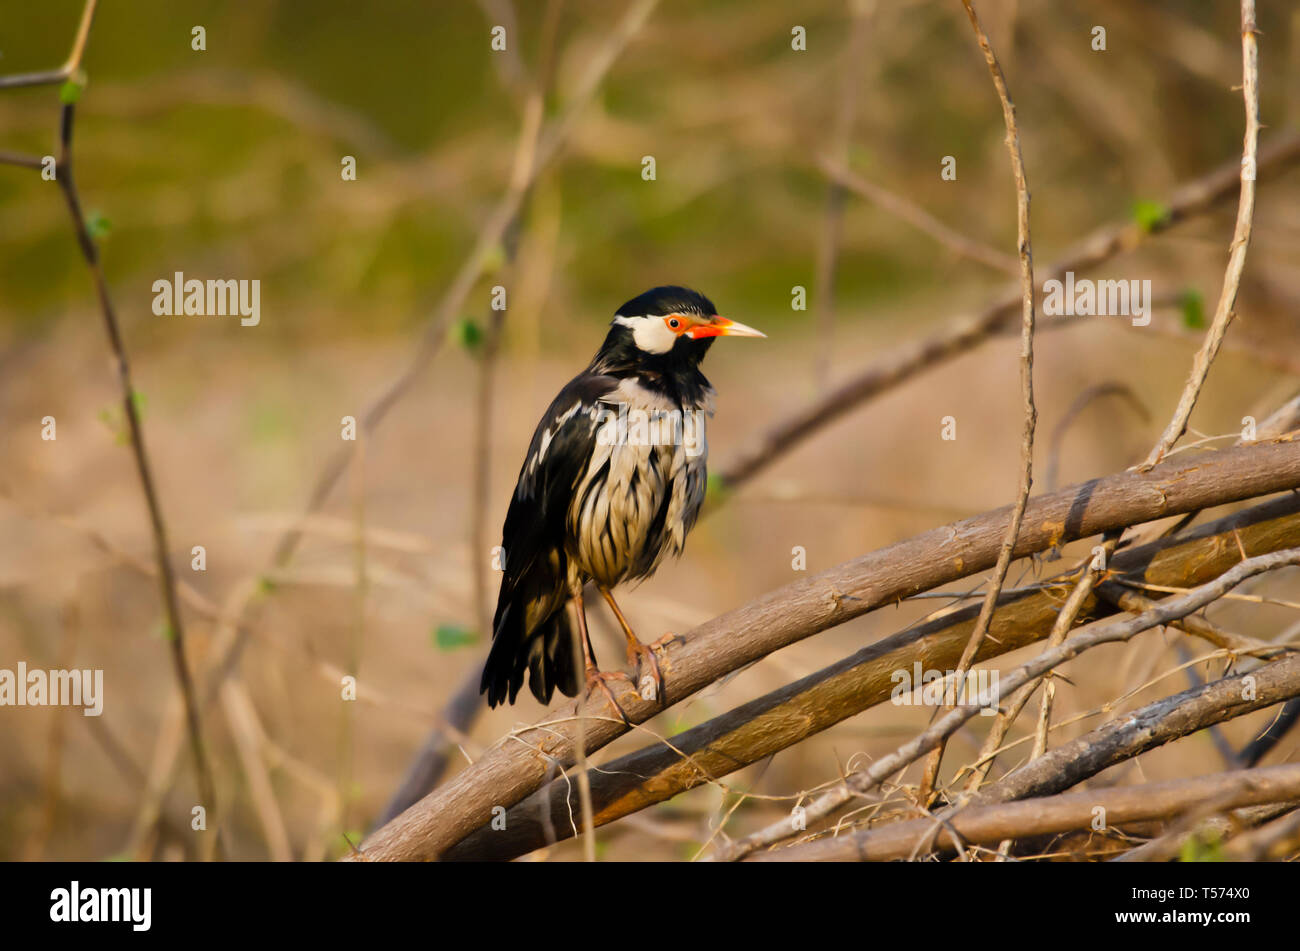 Pied myna or Asian pied starling, Gracupica contra, Keoladeo National Park, Bharatpur, India. Stock Photo